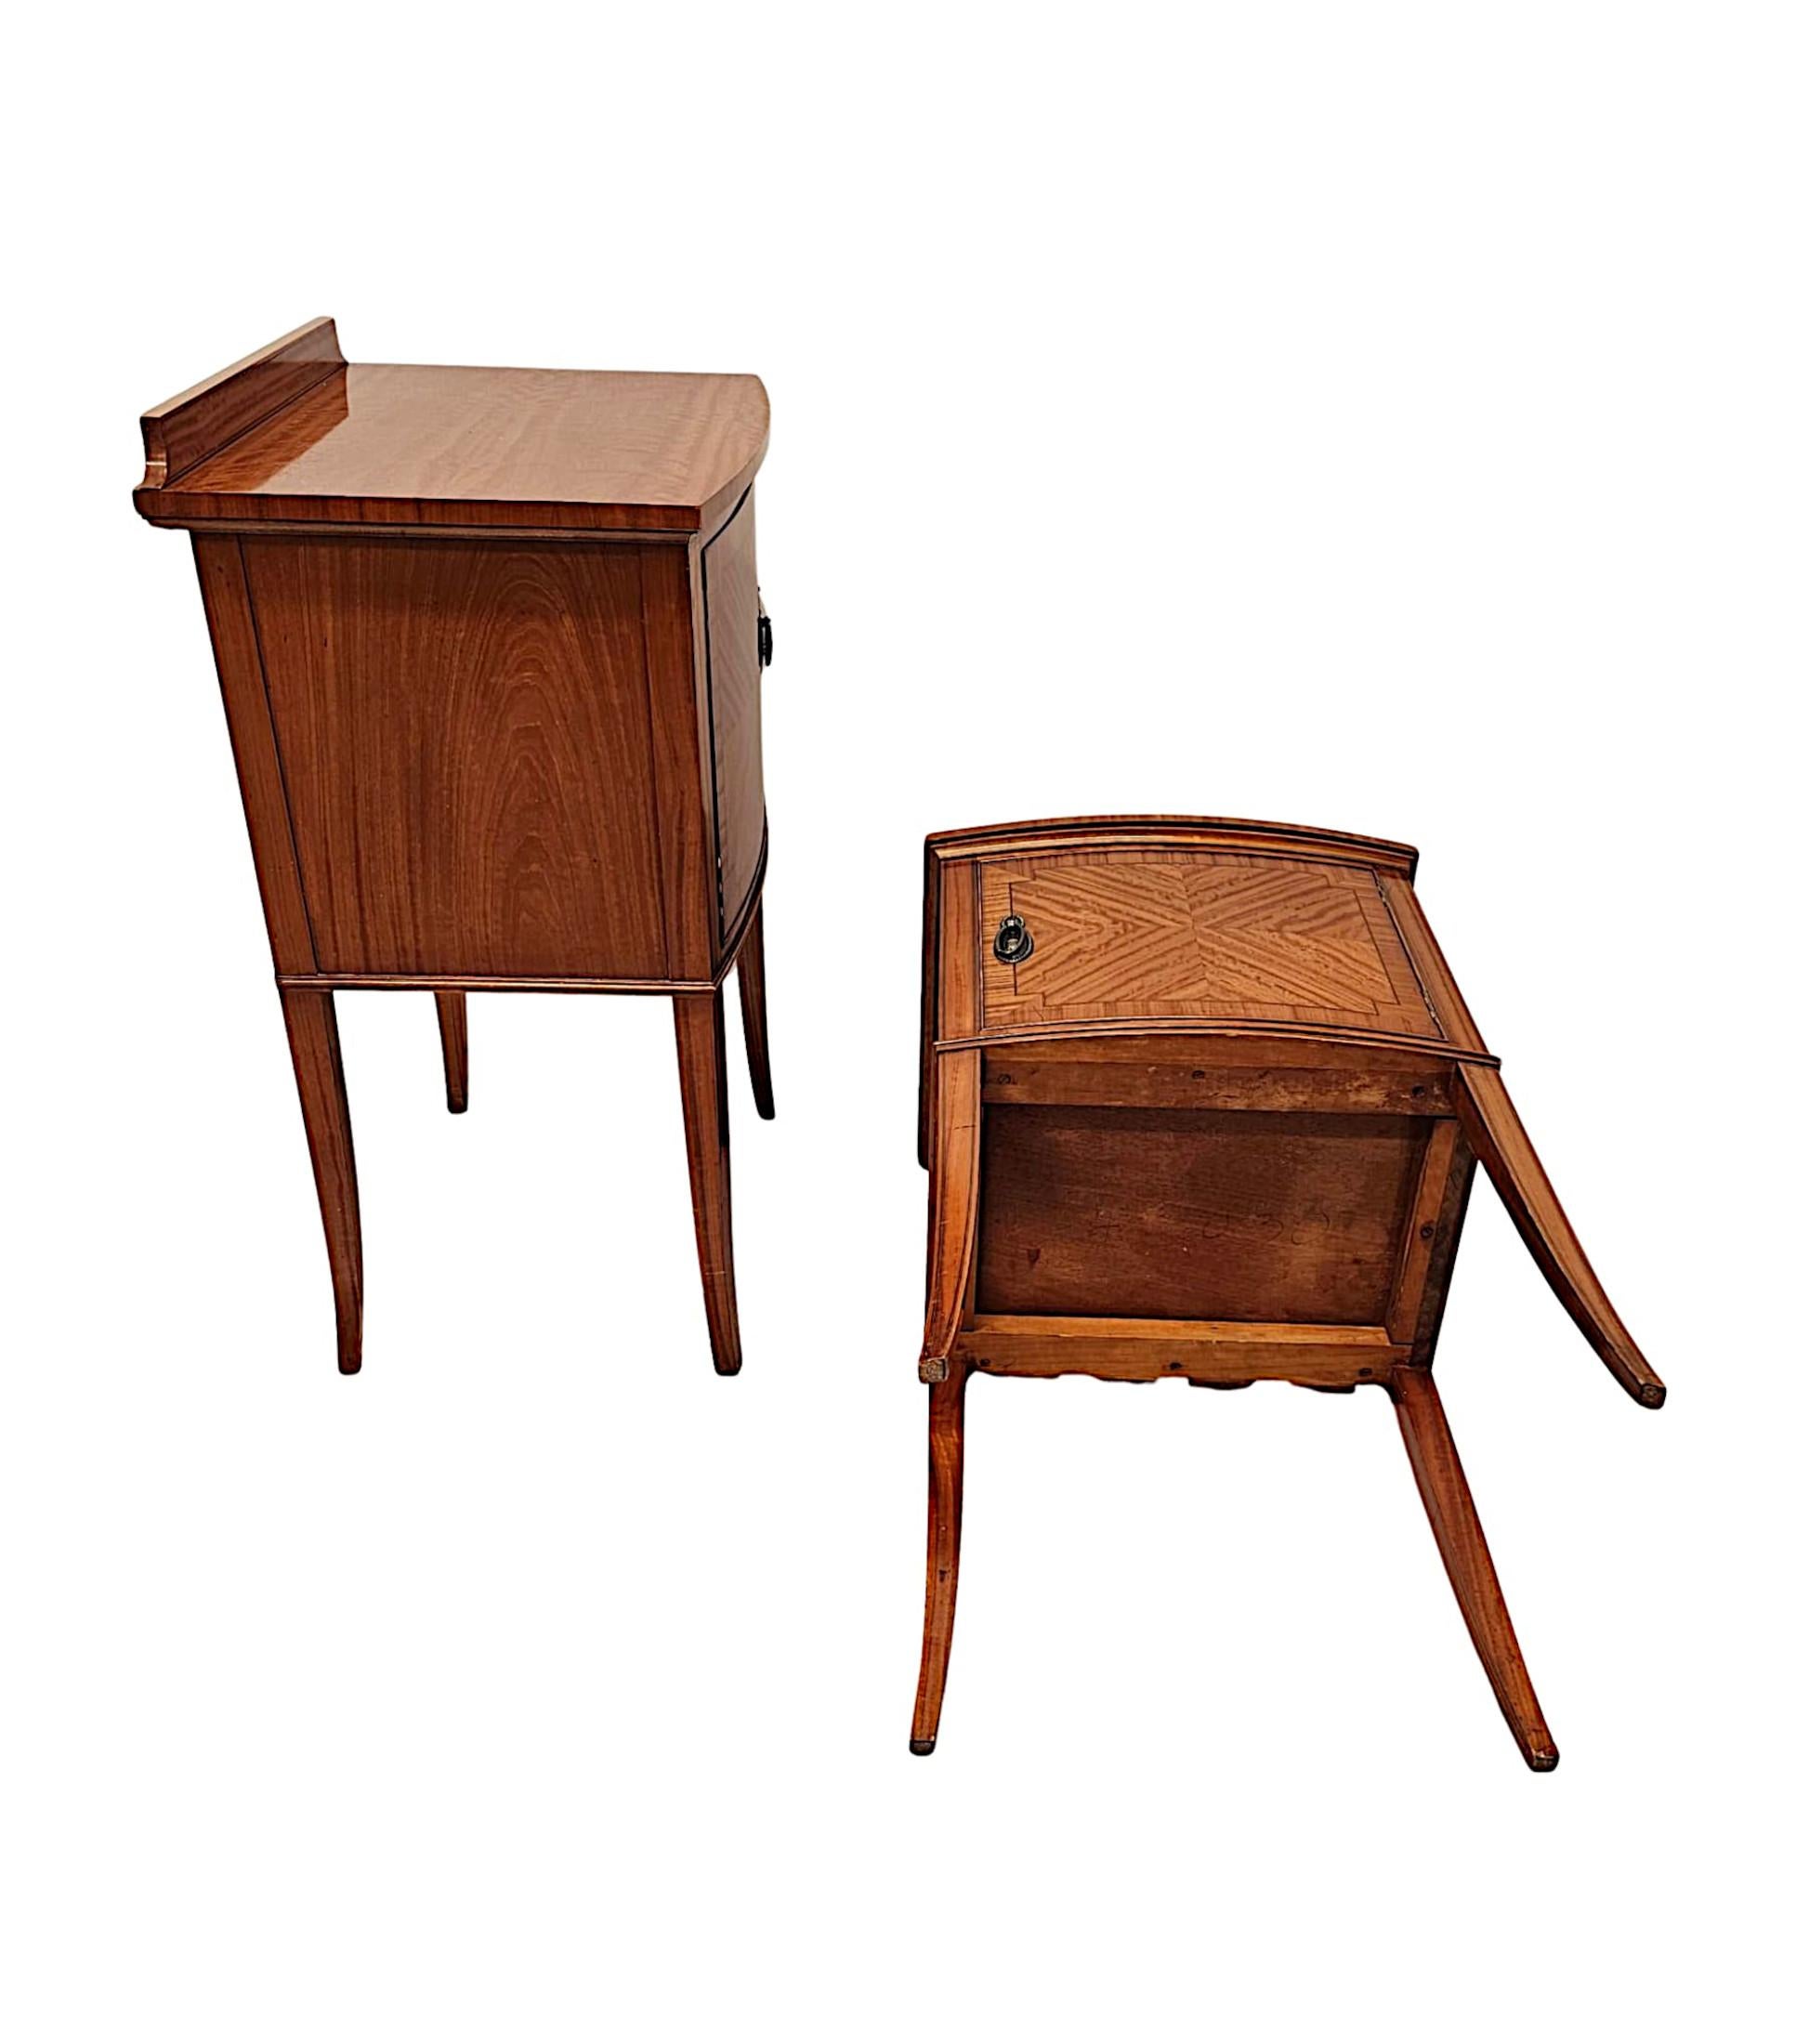 Brass A Fabulous Edwardian Pair of Inlaid Satinwood Bedside Cabinets